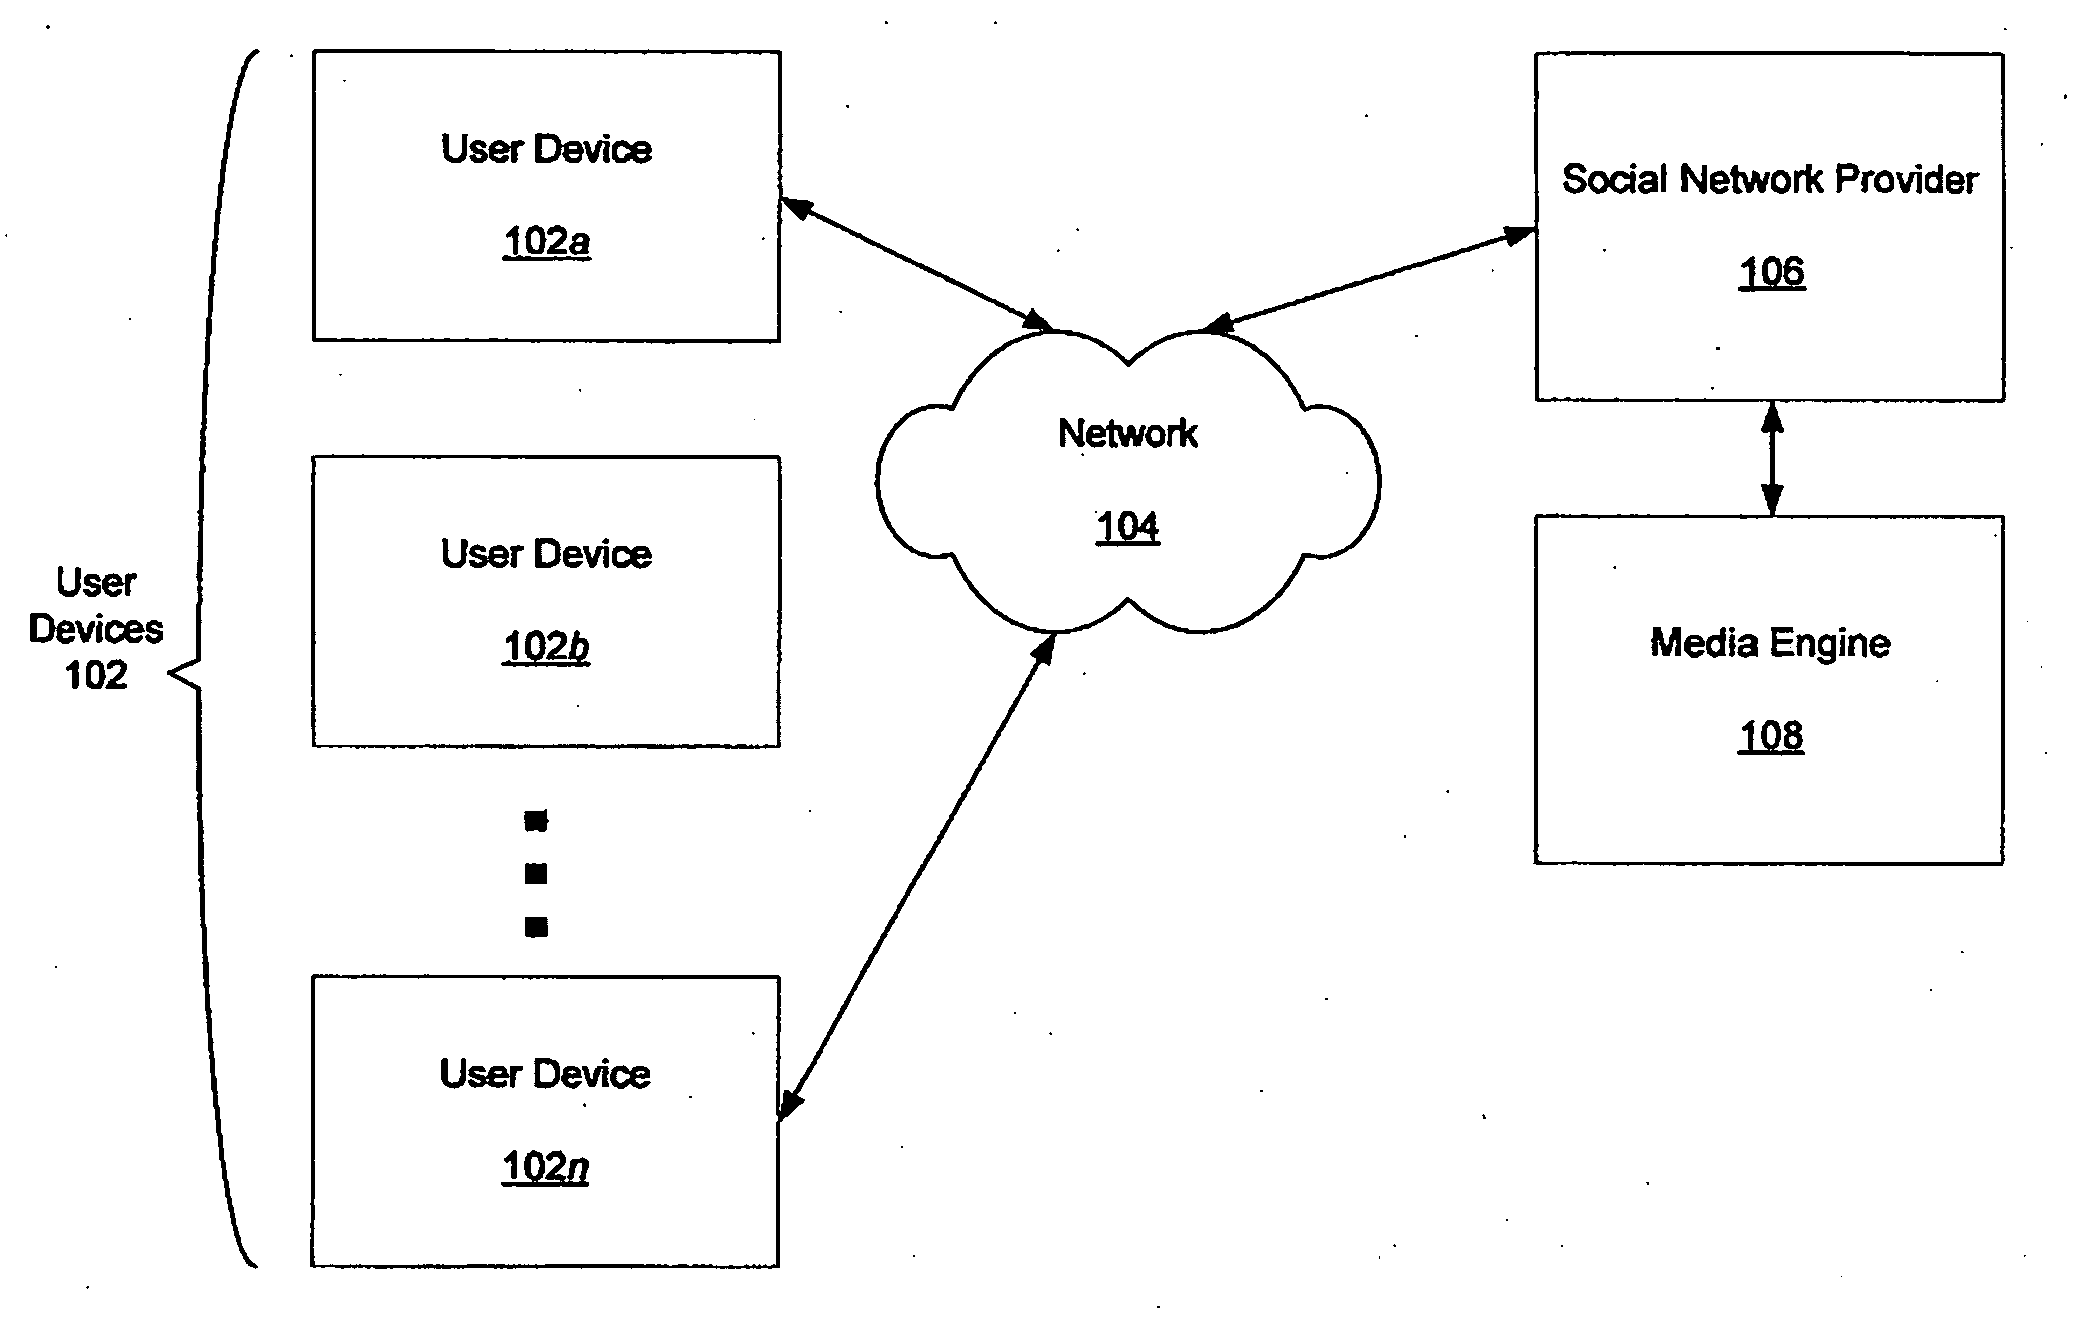 Systems and methods for providing dynamically selected media content to a user of an electronic device in a social network environment